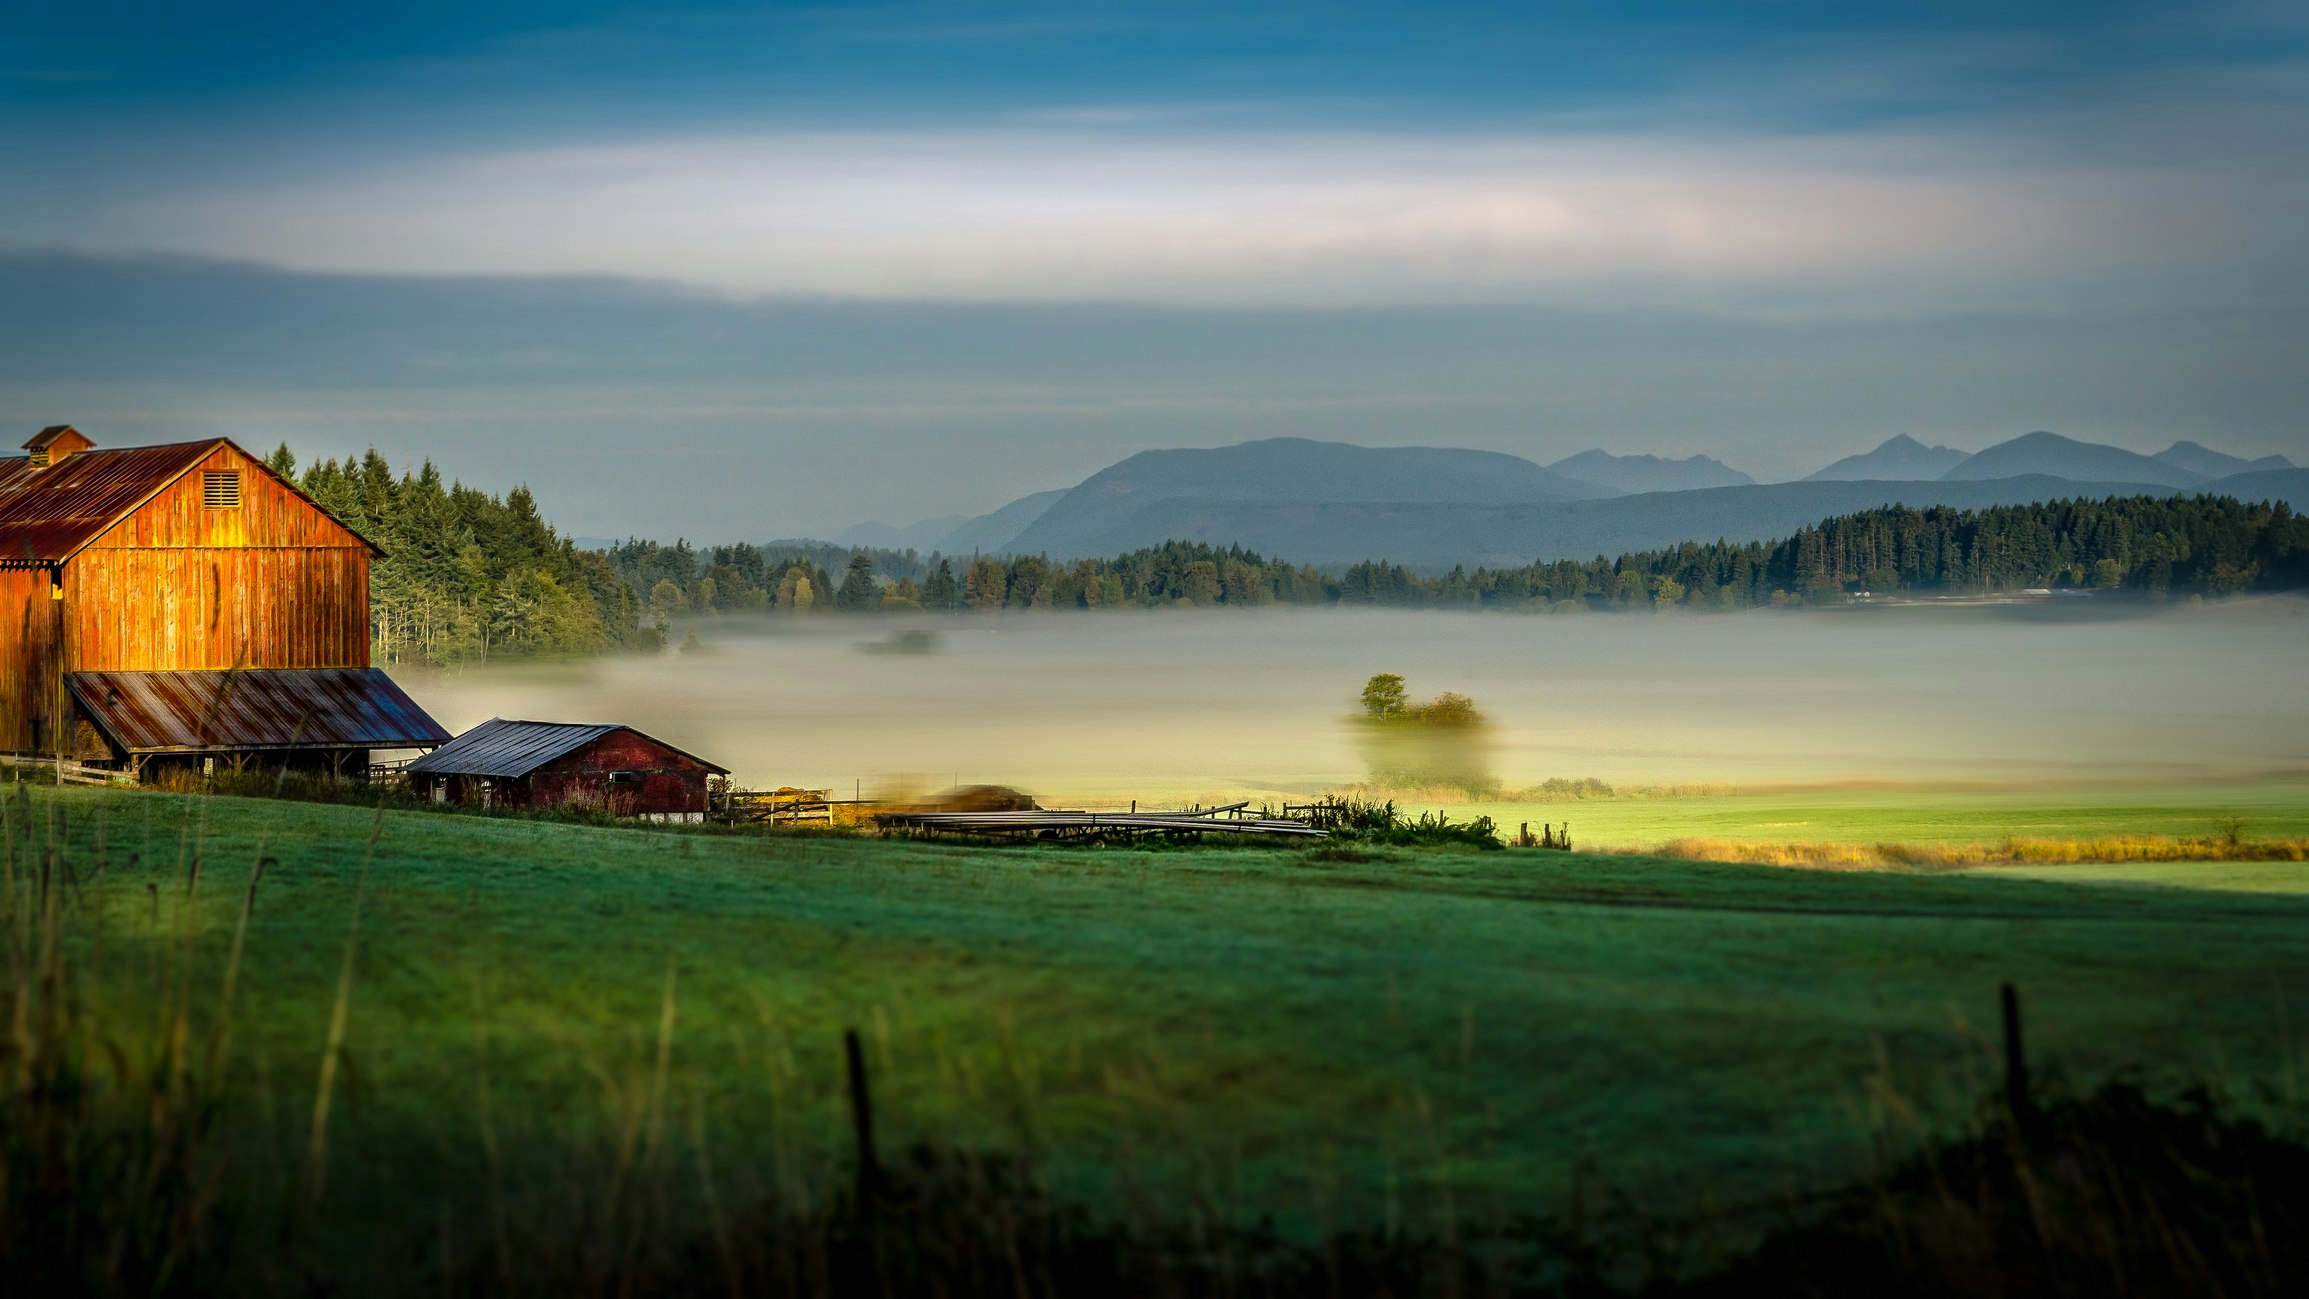 mist in front of rolling hills with a farm house in the foreground